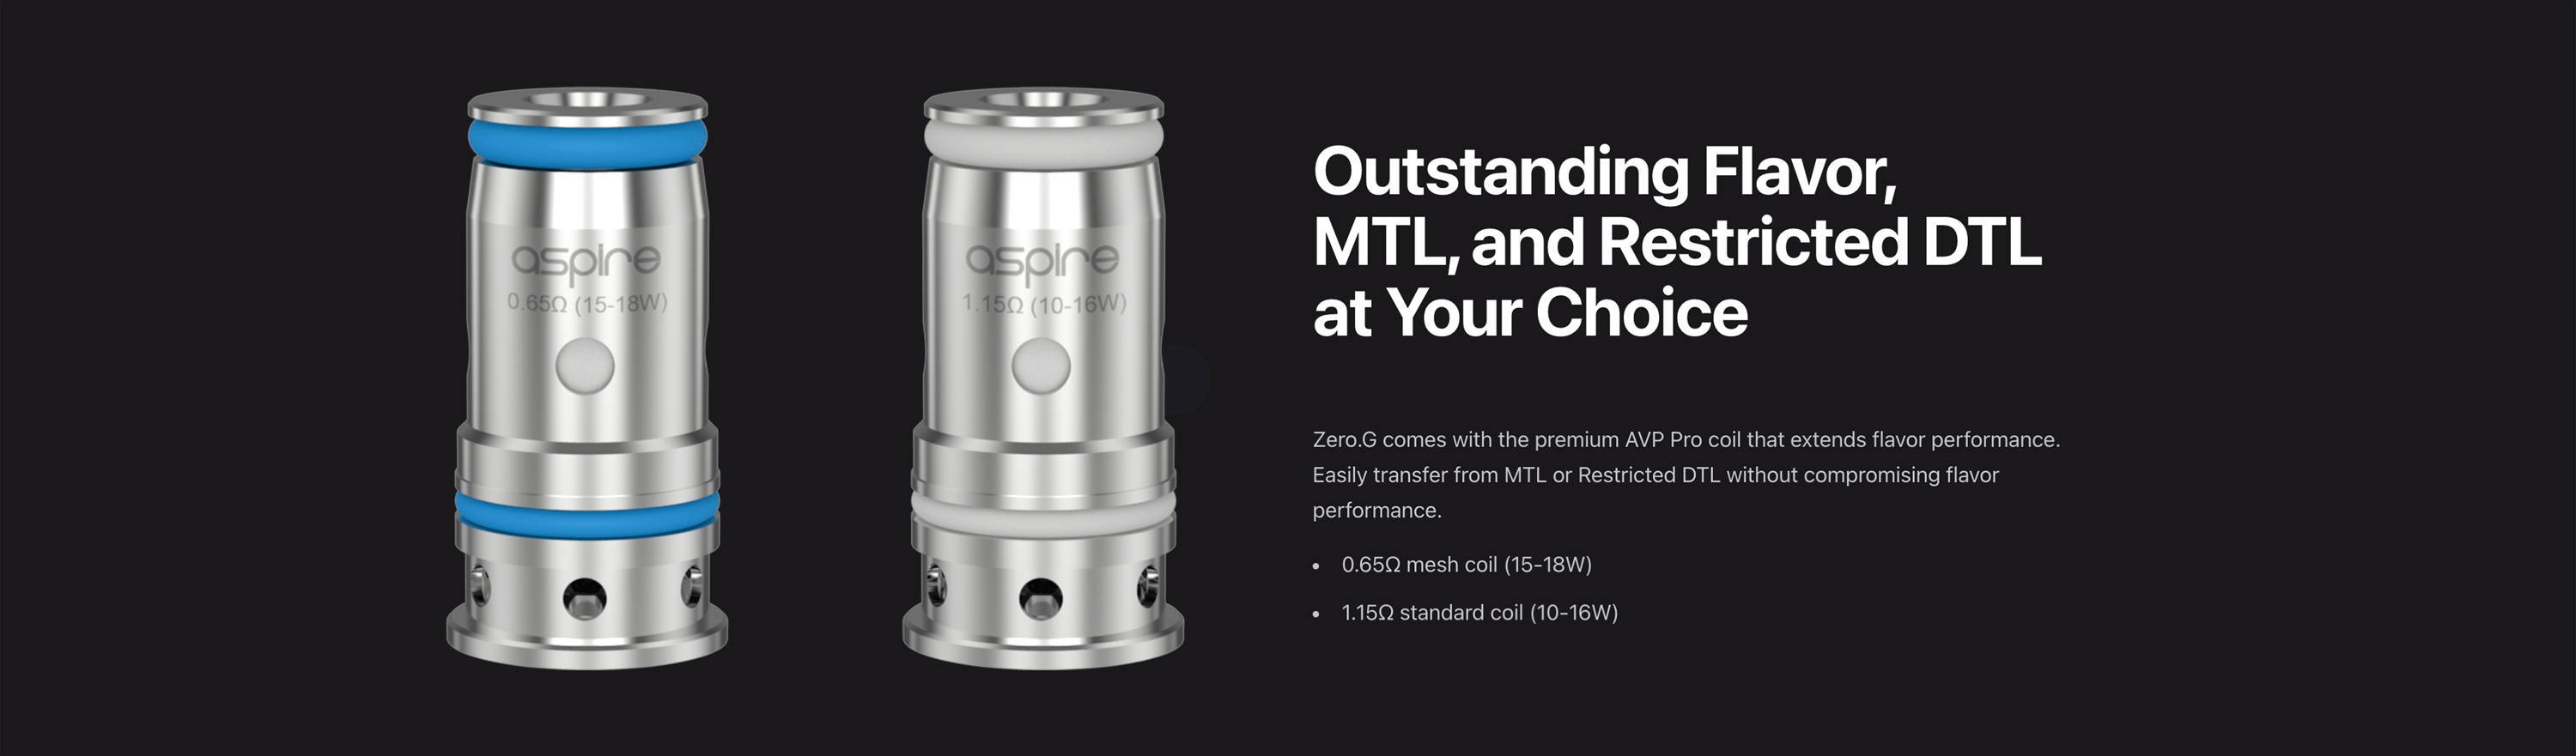 Outstanding Flavor, MTL, and Restricted DTL at Your Choice  Zero.G comes with the premium AVP Pro coil that extends flavor performance. Easily transfer from MTL or Restricted DTL without compromising flavor performance.       0.65Ω mesh coil (15-18W)      1.15Ω standard coil (10-16W)